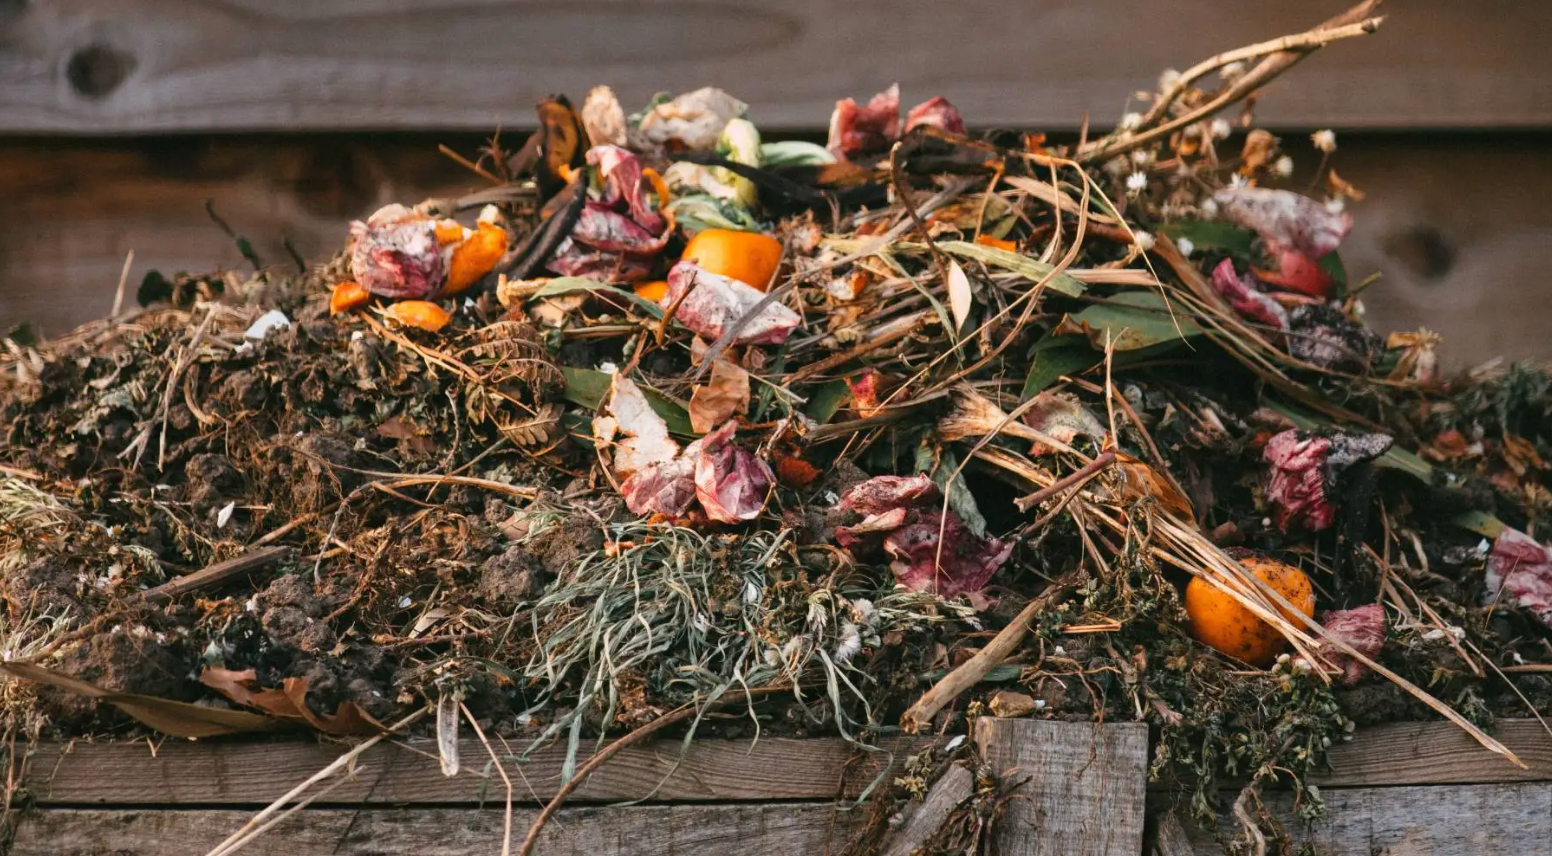 Why is composting important?